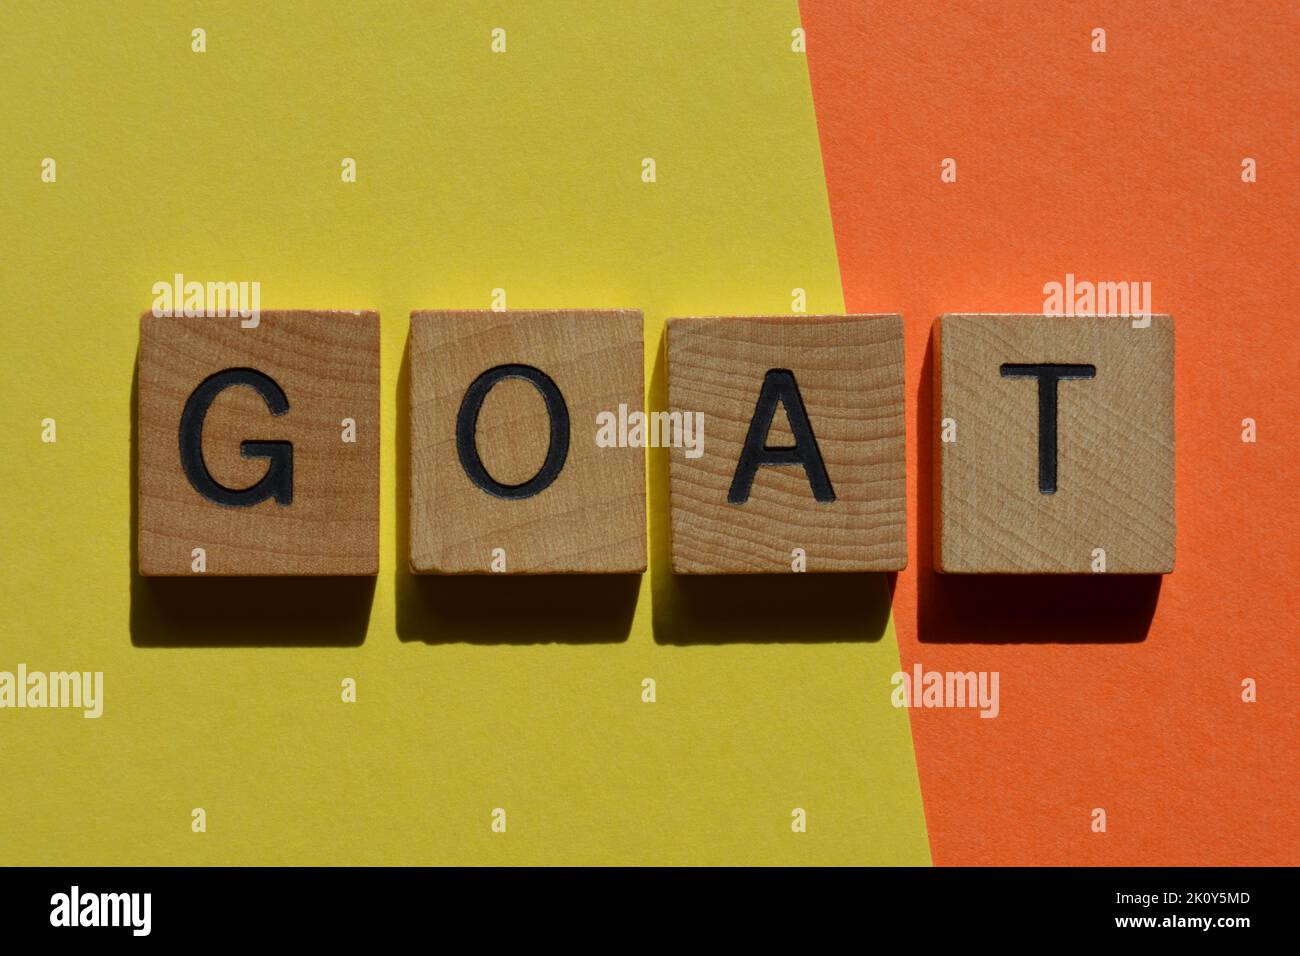 G O A T, acronym for Greatest Of All Time, in wooden alphabet letters isolated on bright and colourful background Stock Photo